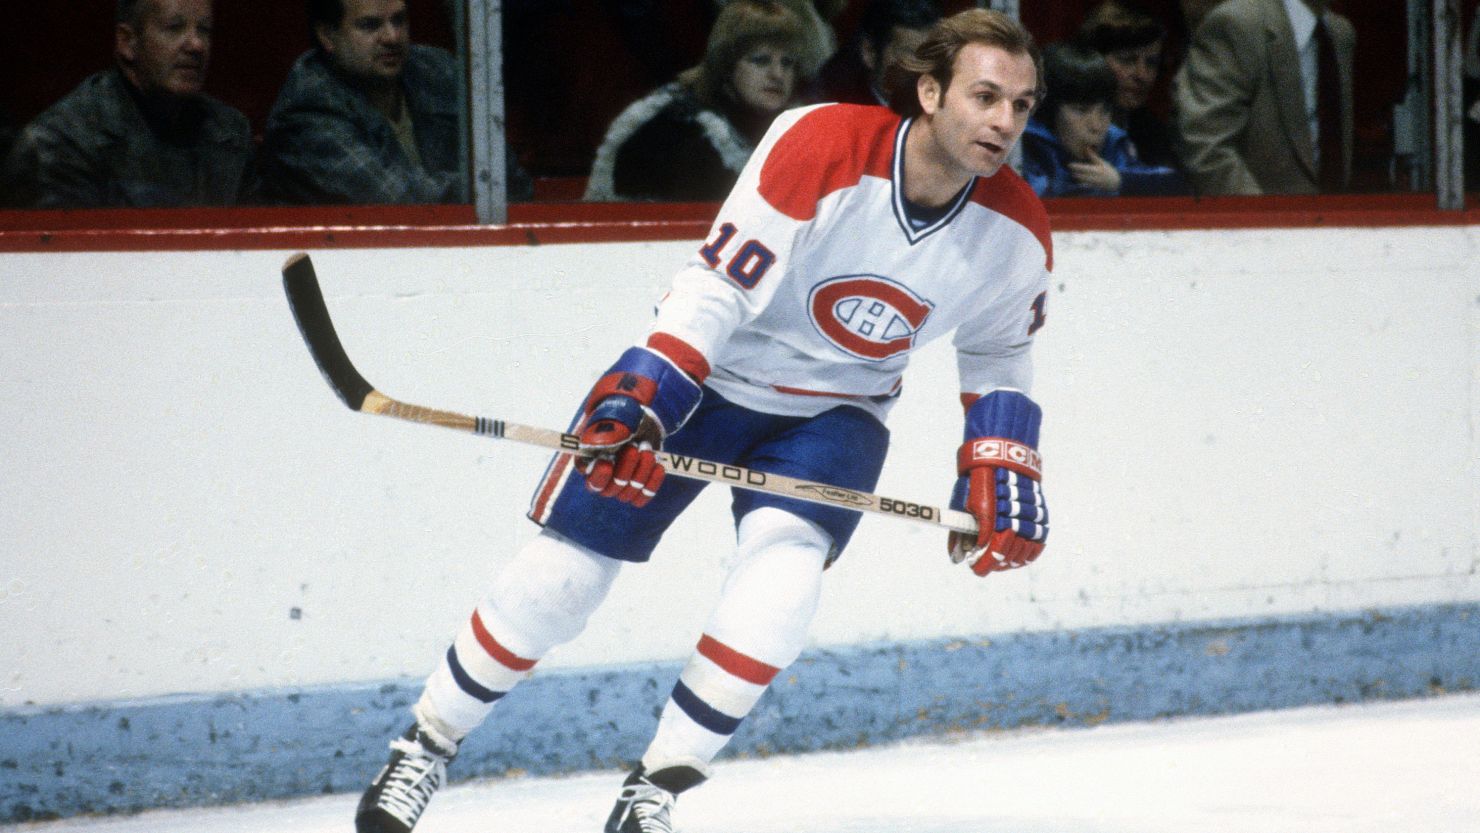 Guy Lafleur has died at the age of 70, his former team announced on Friday.